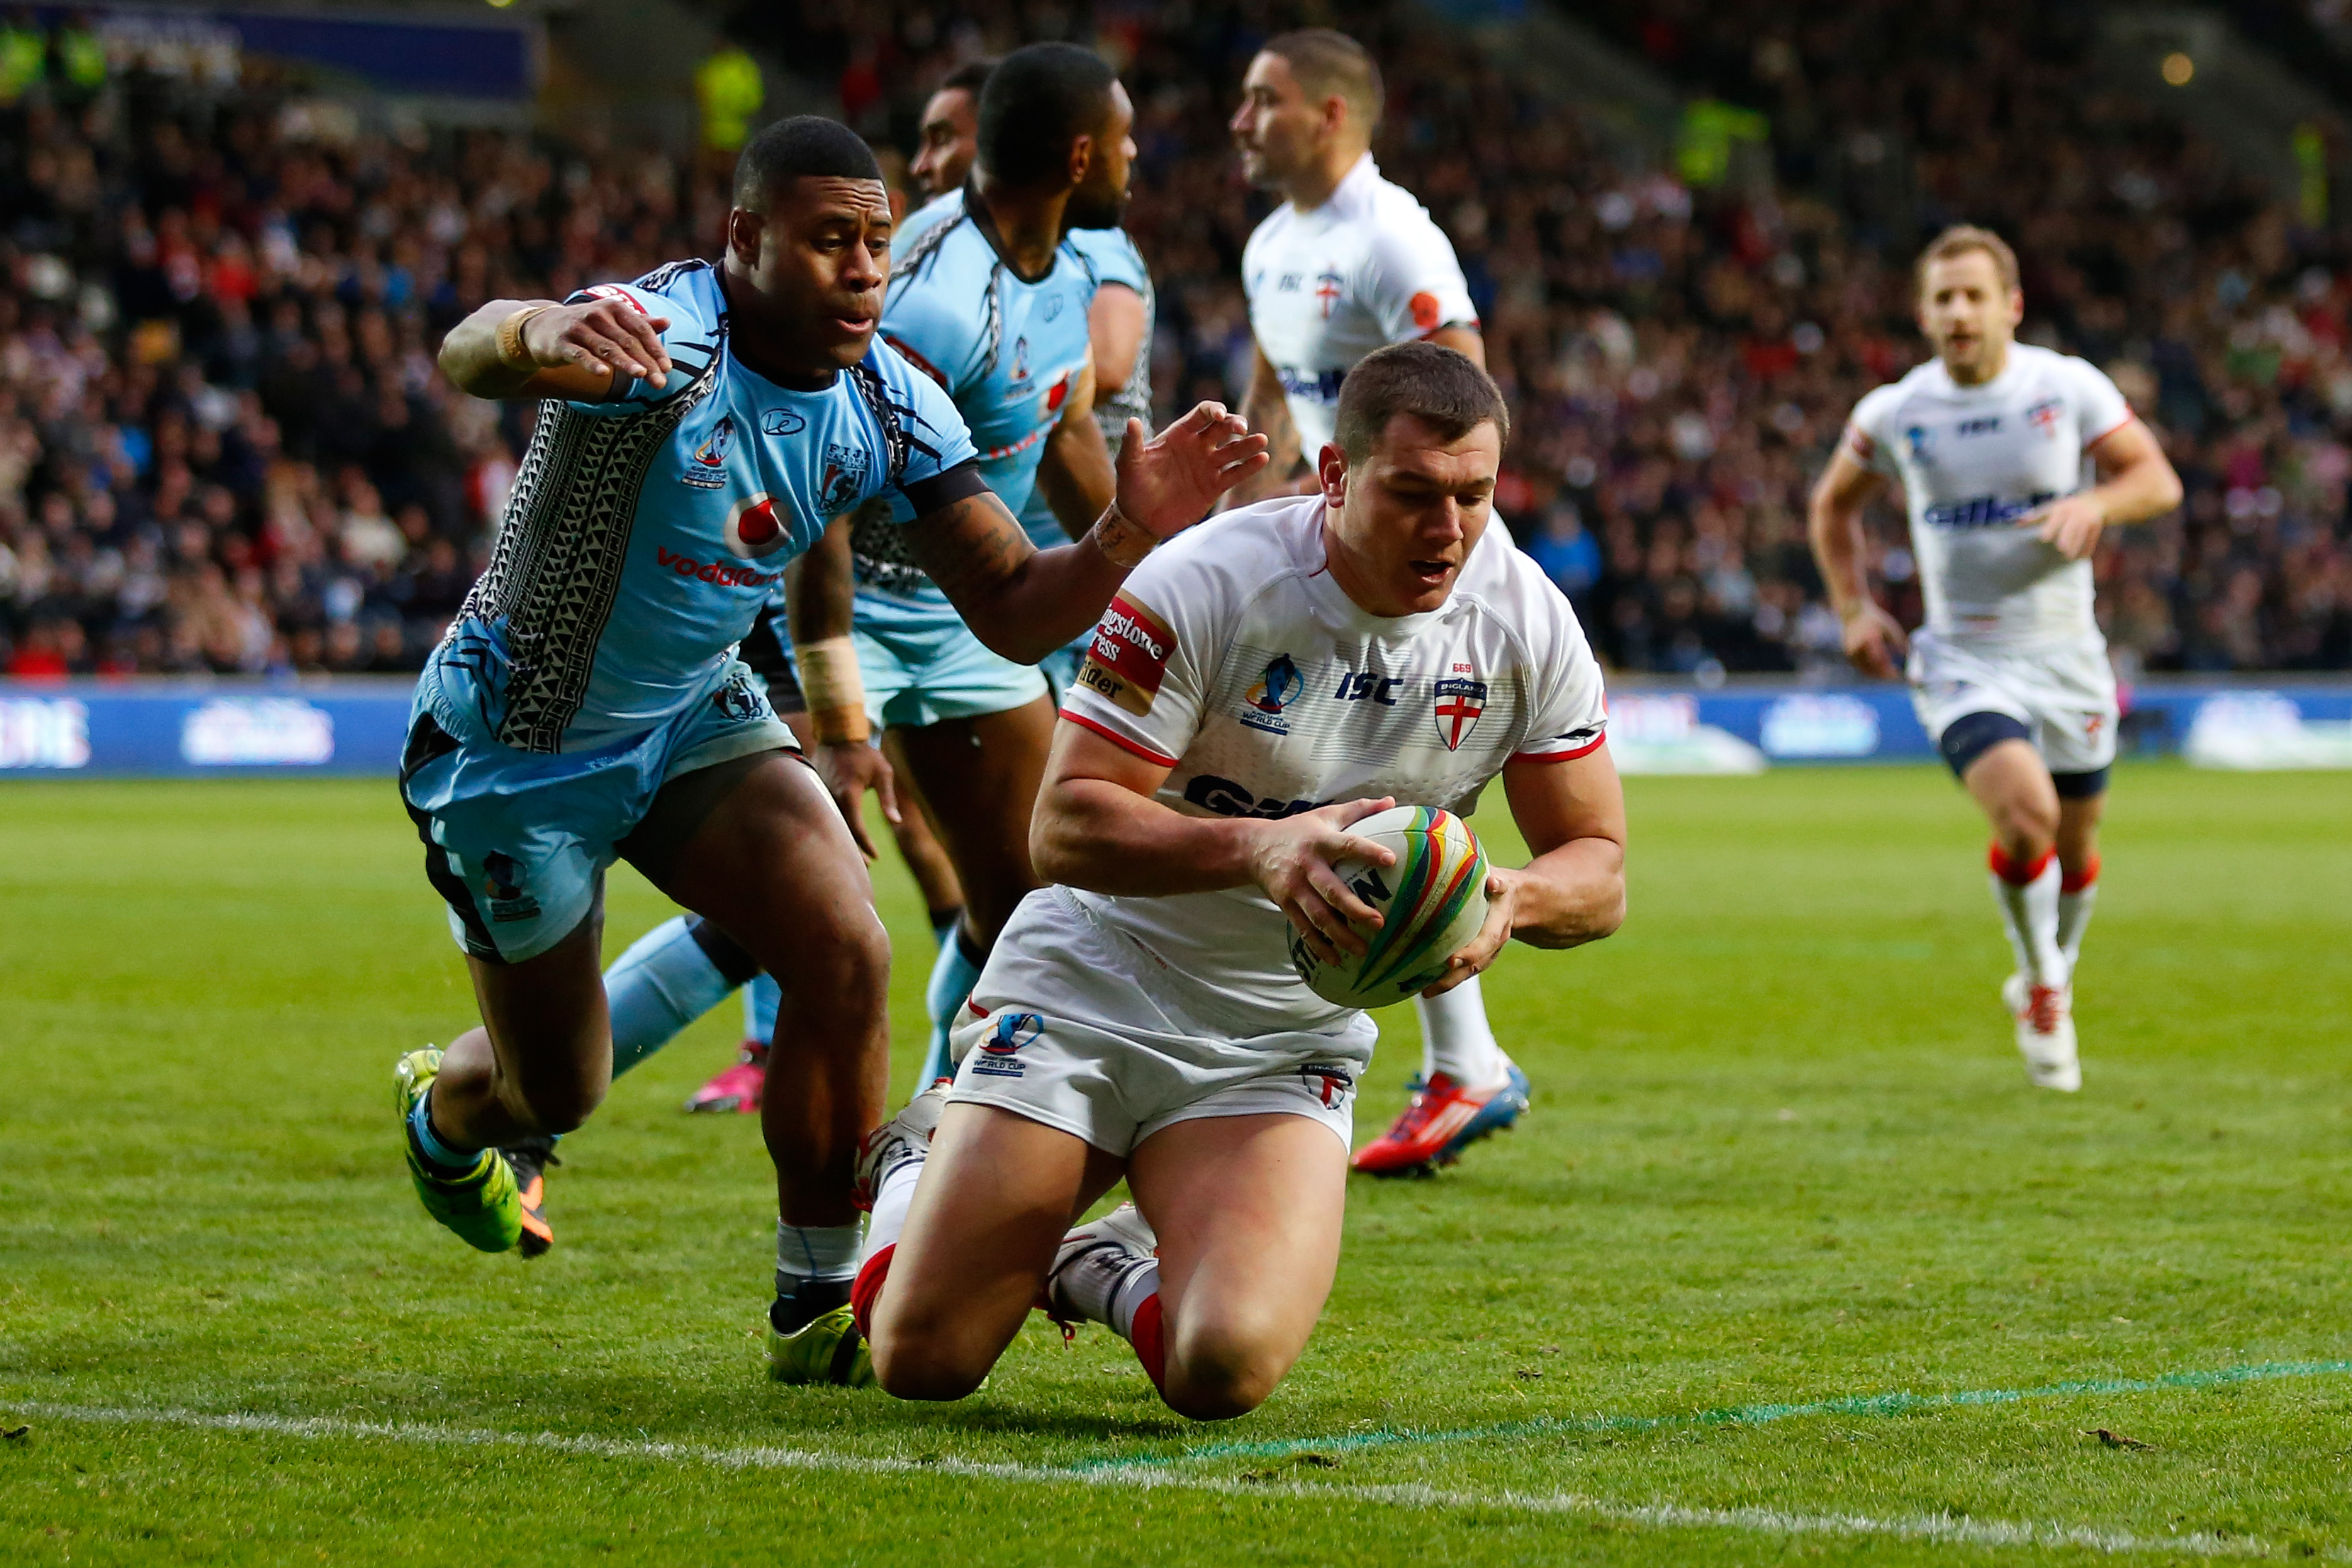 Watch The England Rugby Game Live